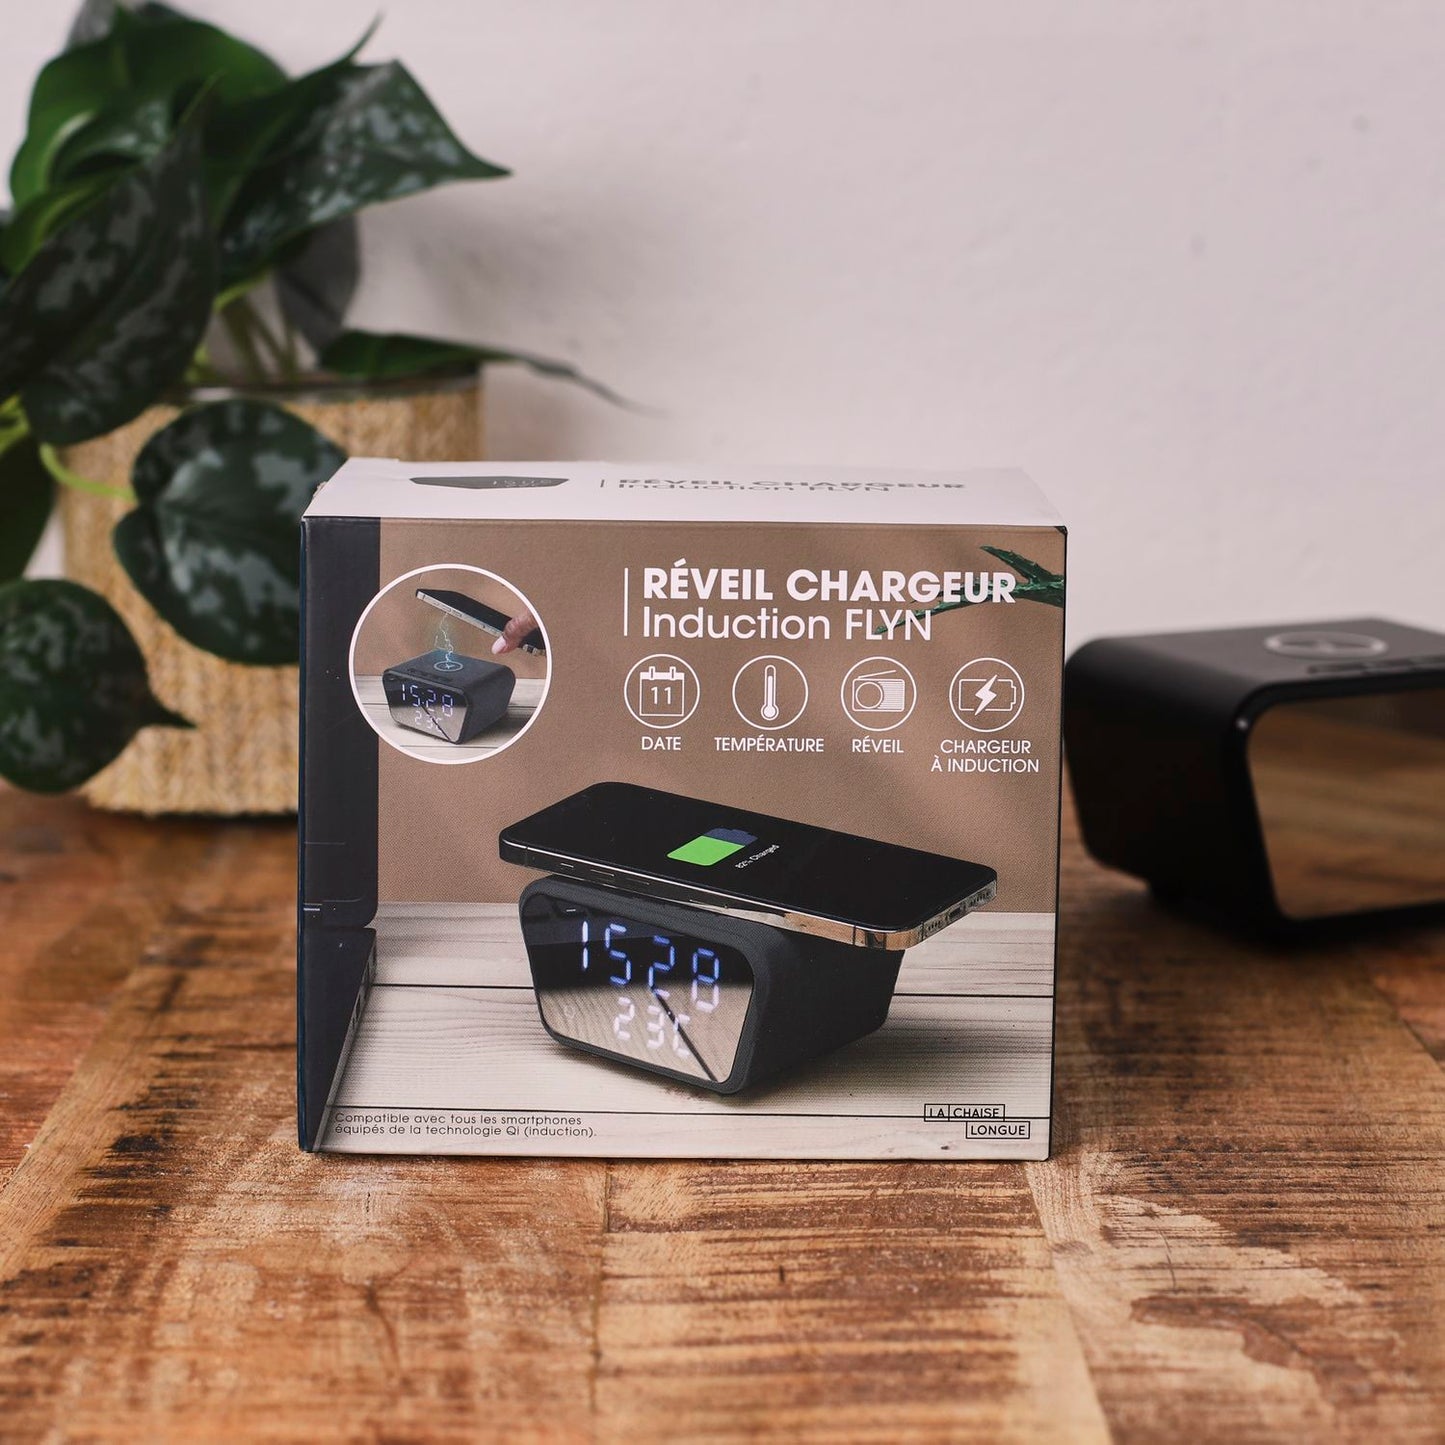 REVEIL CHARGEUR INDUCTION FLYN